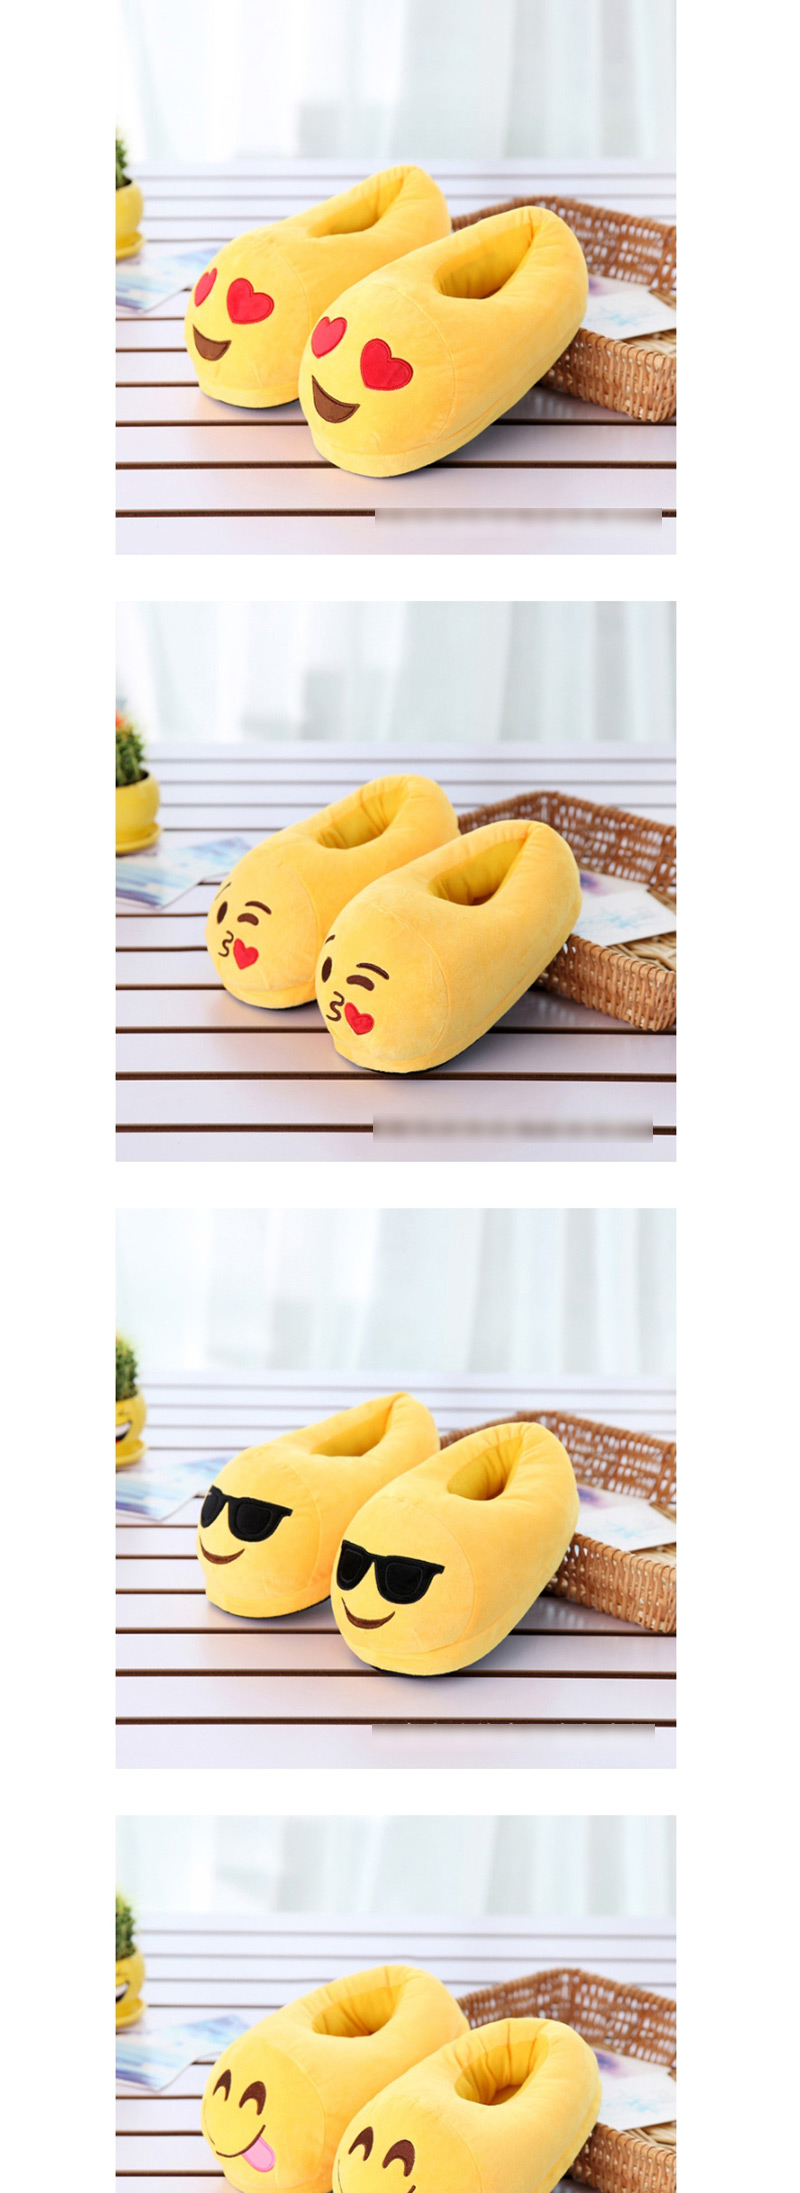 Fashion 15 Yellow Sleeping Cartoon Expression Plush Bag With Cotton Slippers,Slippers